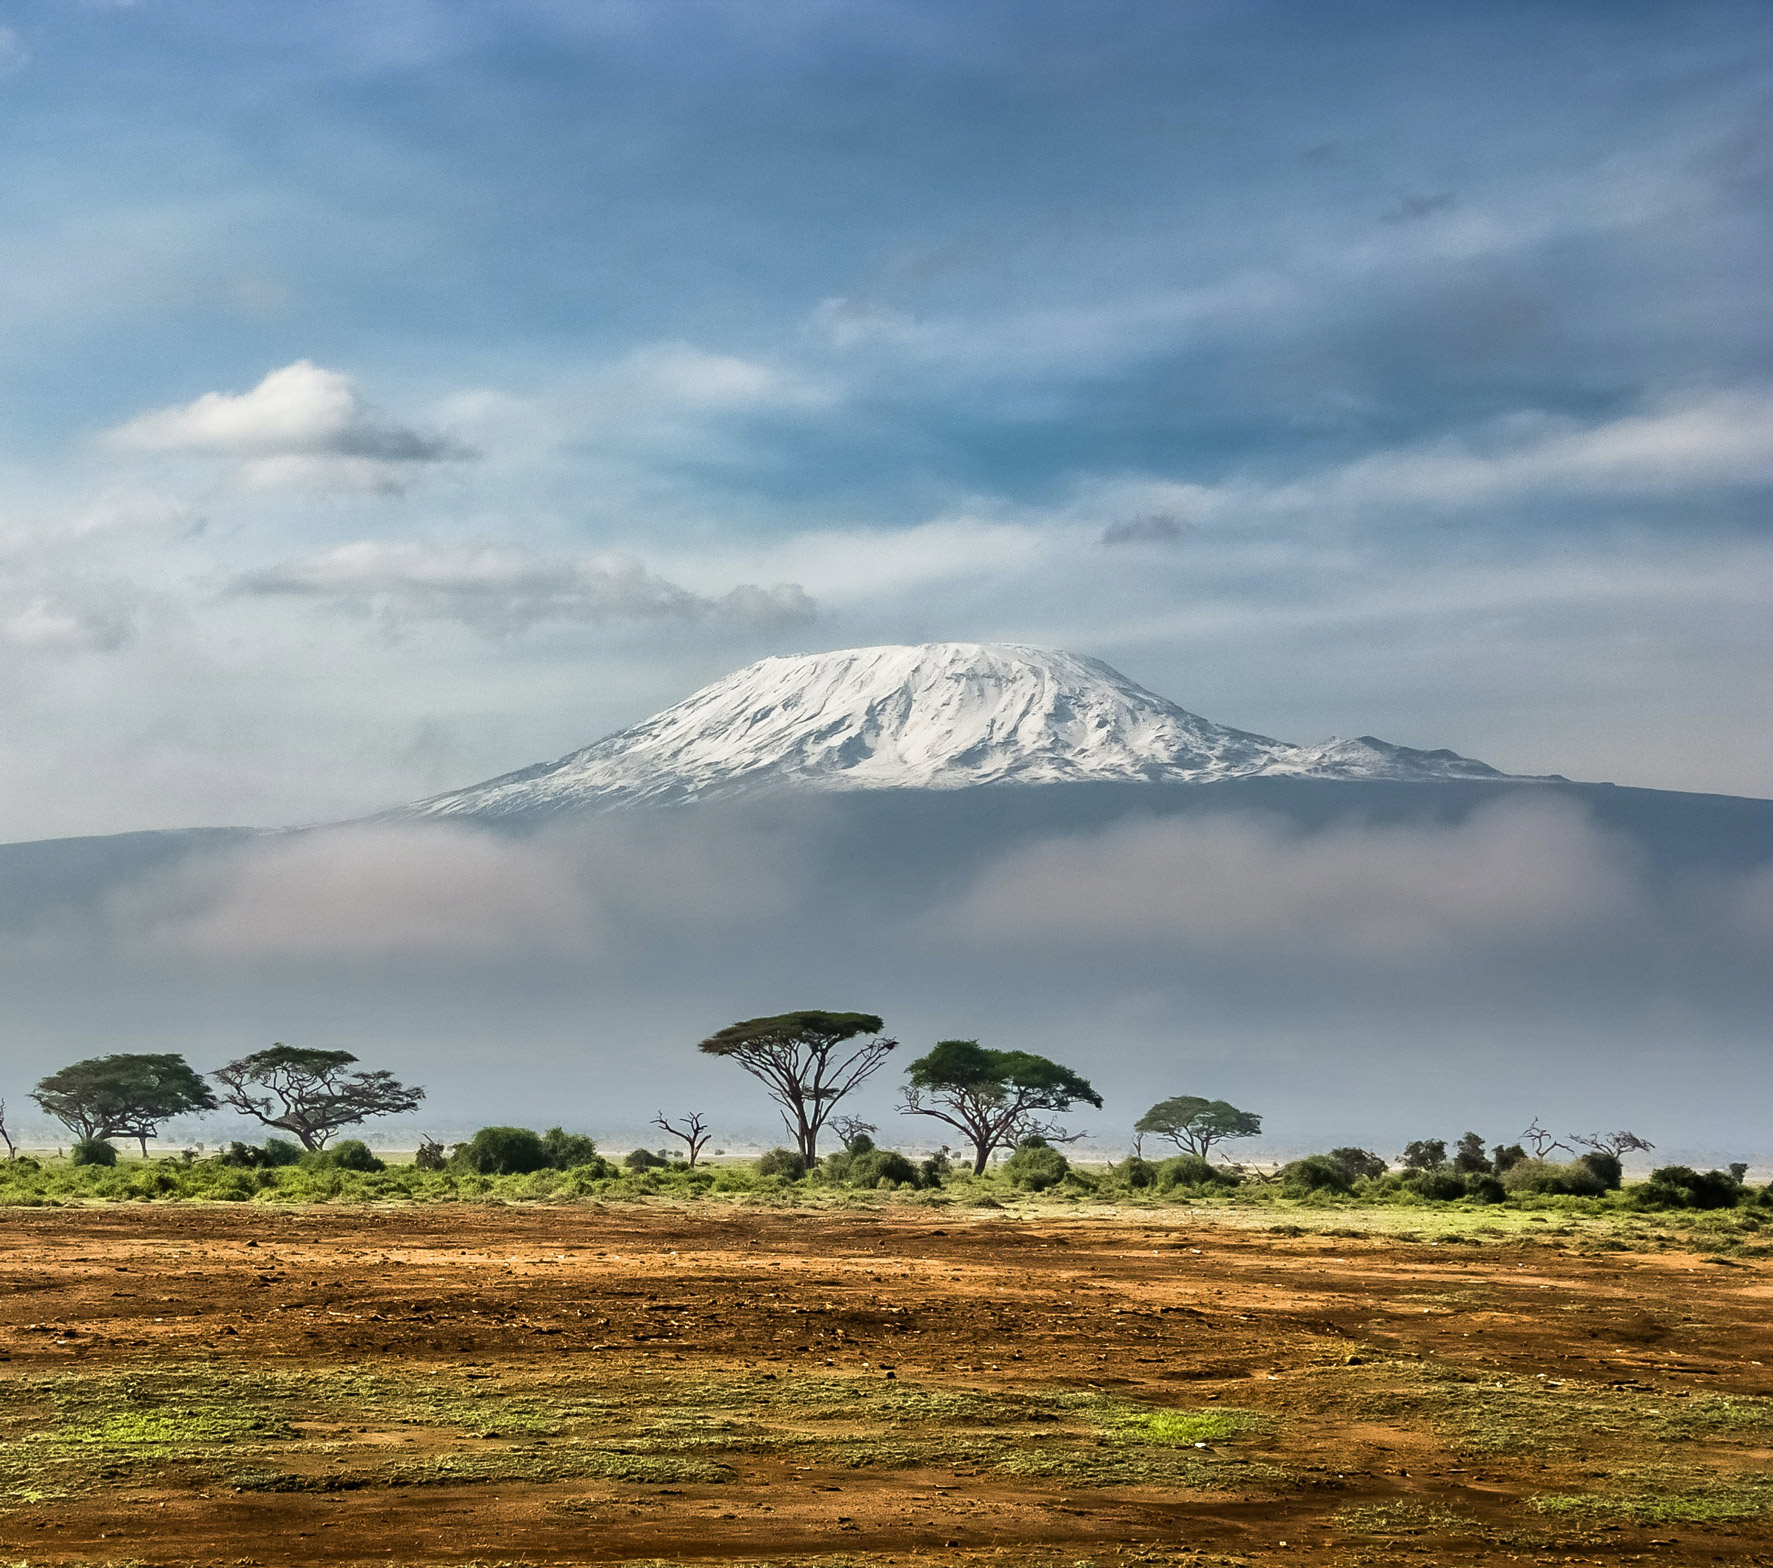 mount kilimanjaro shrouded by clouds